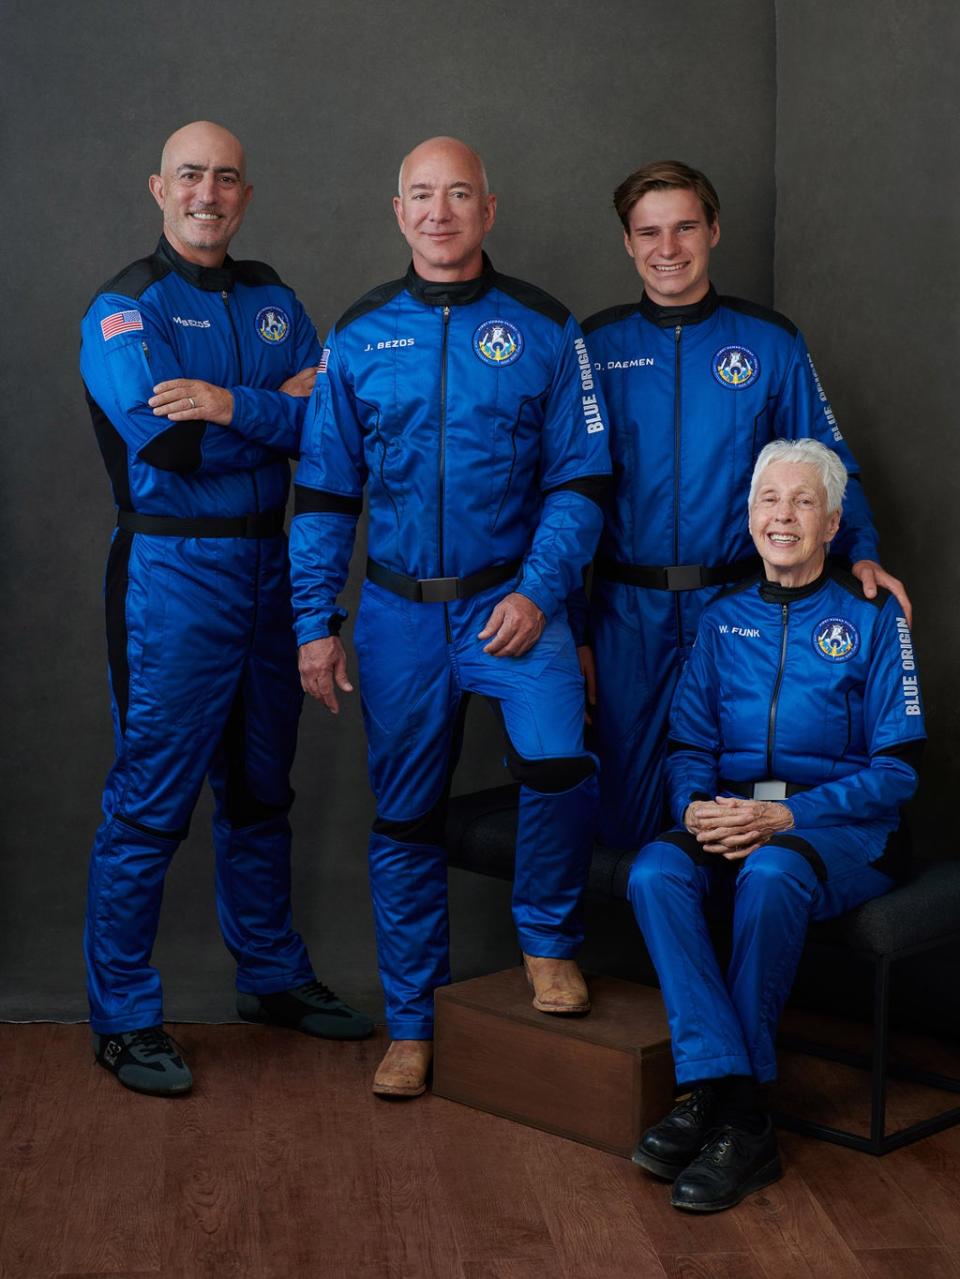 Amazon founder Jeff Bezos (centre) and the Blue Origin crew before their flight into space earlier this year